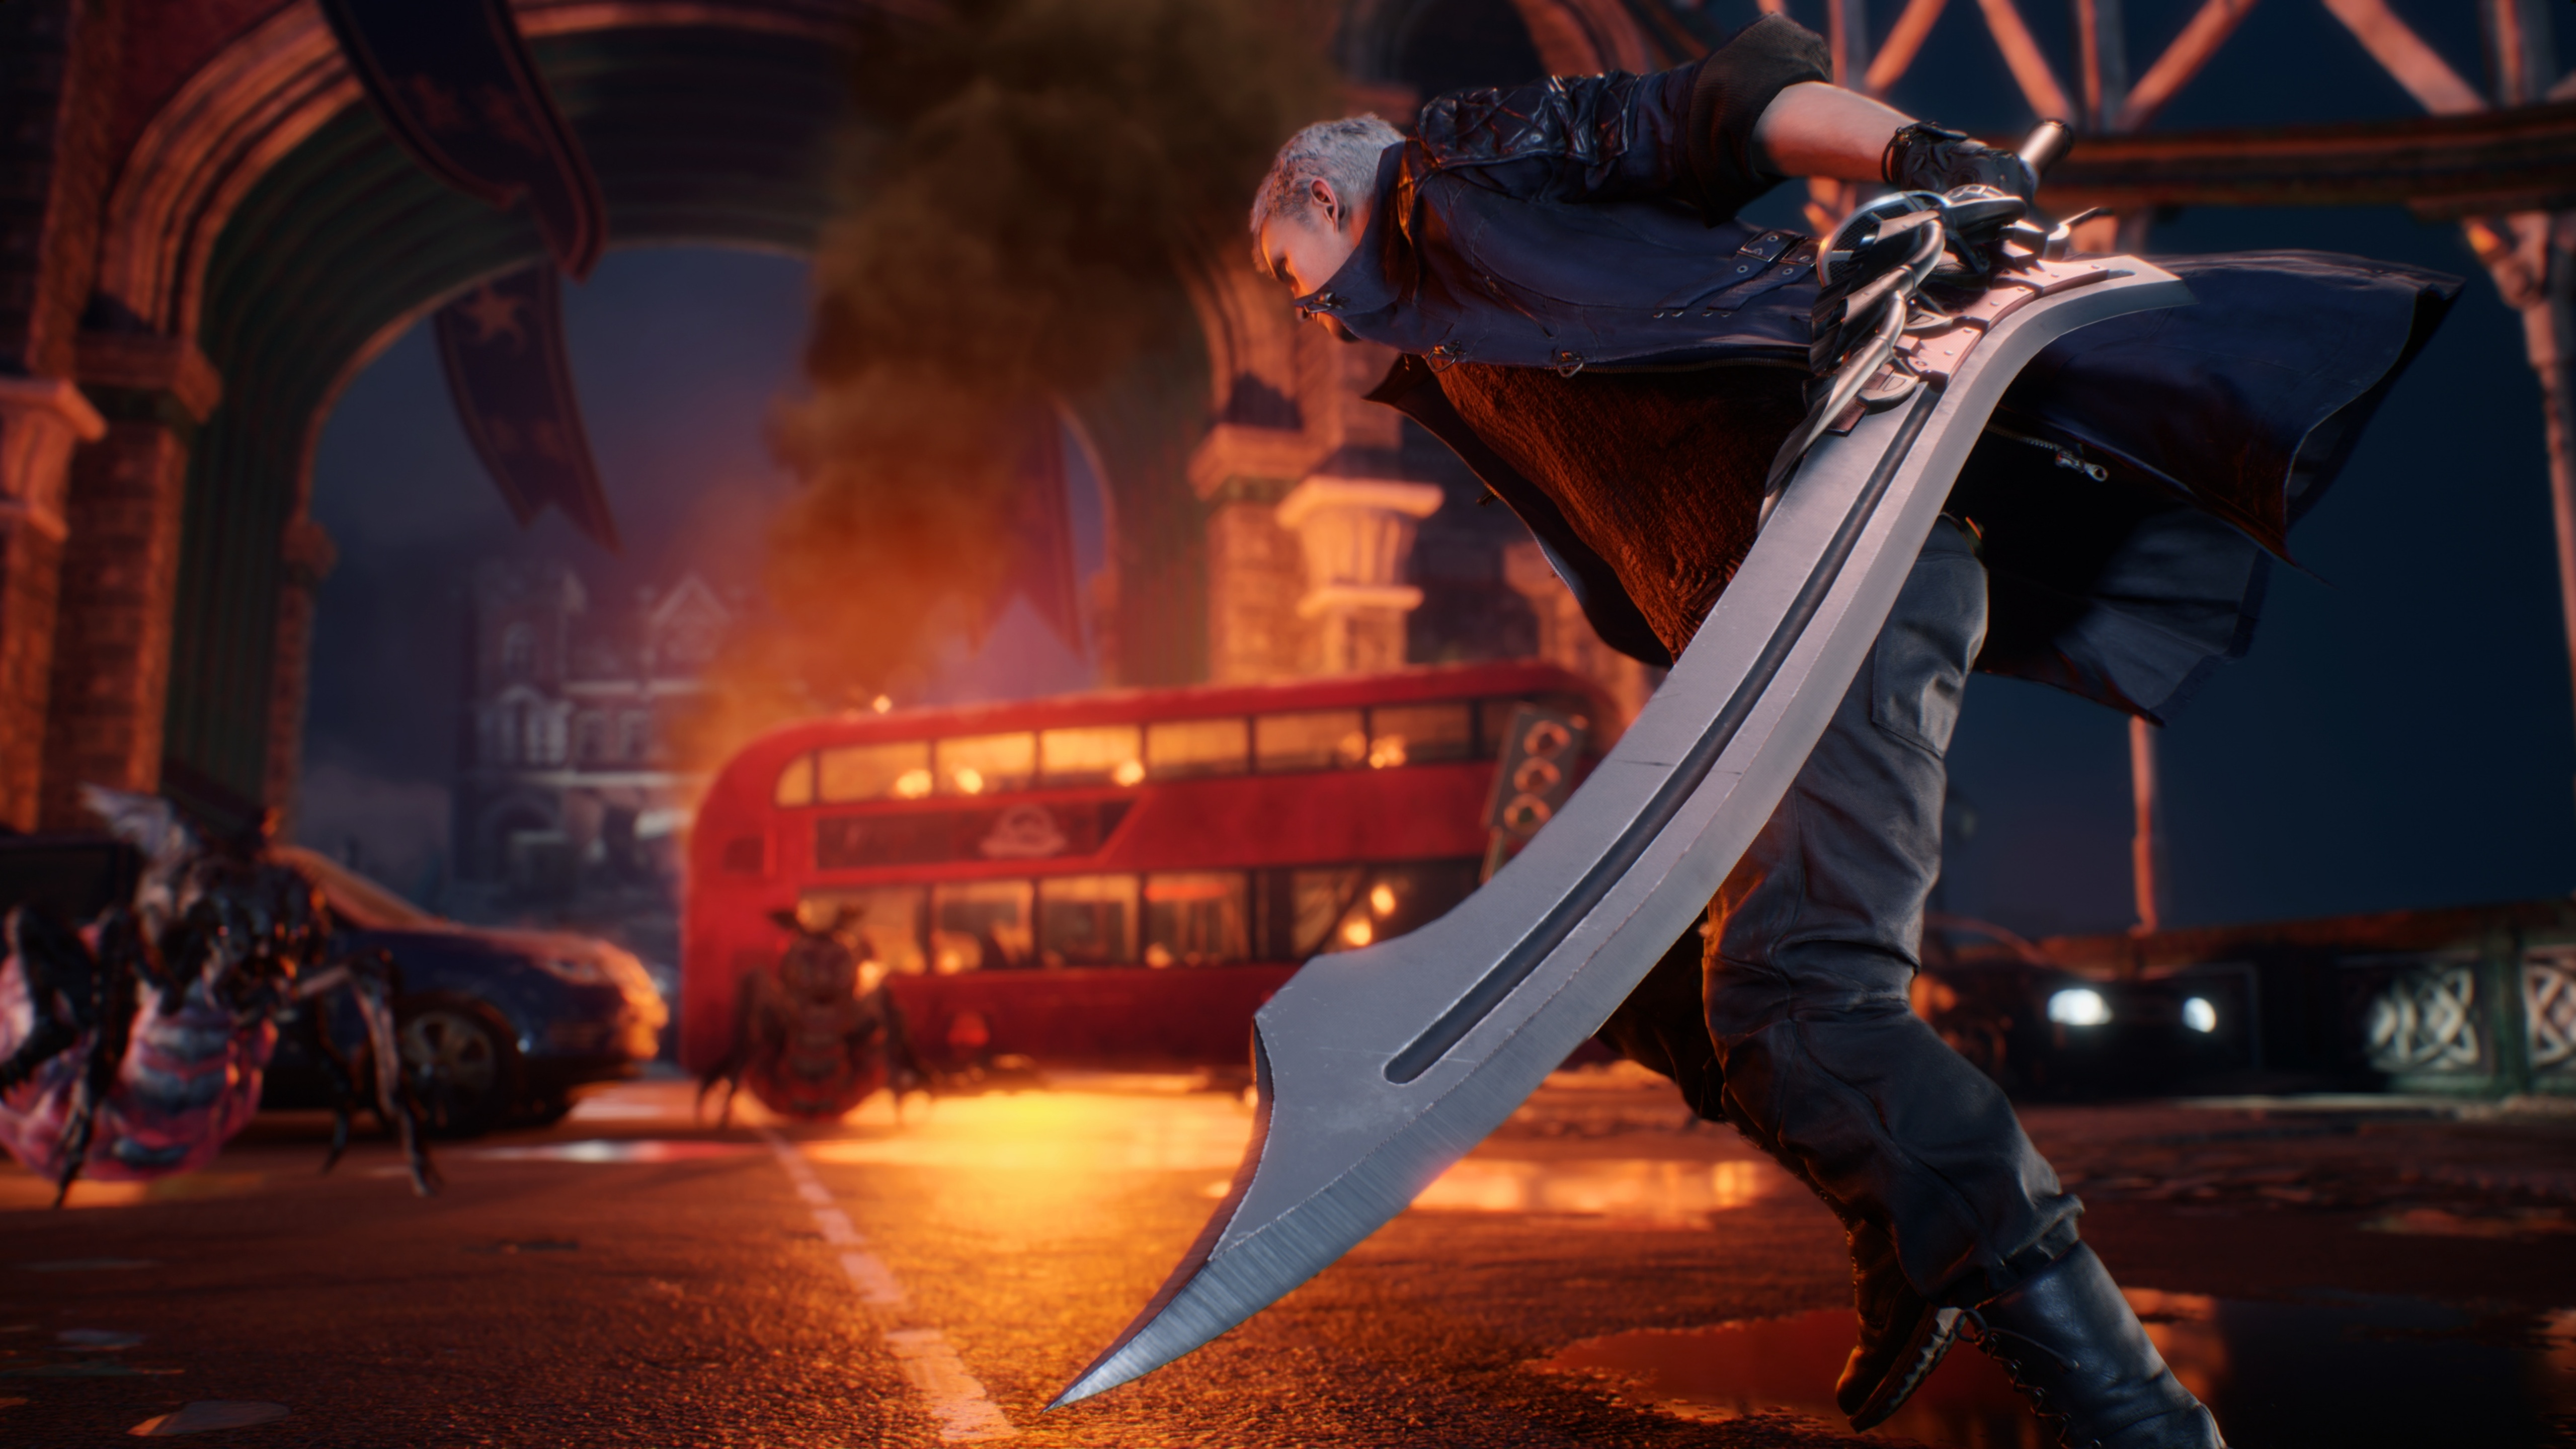 Devil May Cry 5 Wallpaper in 4K and Full HD